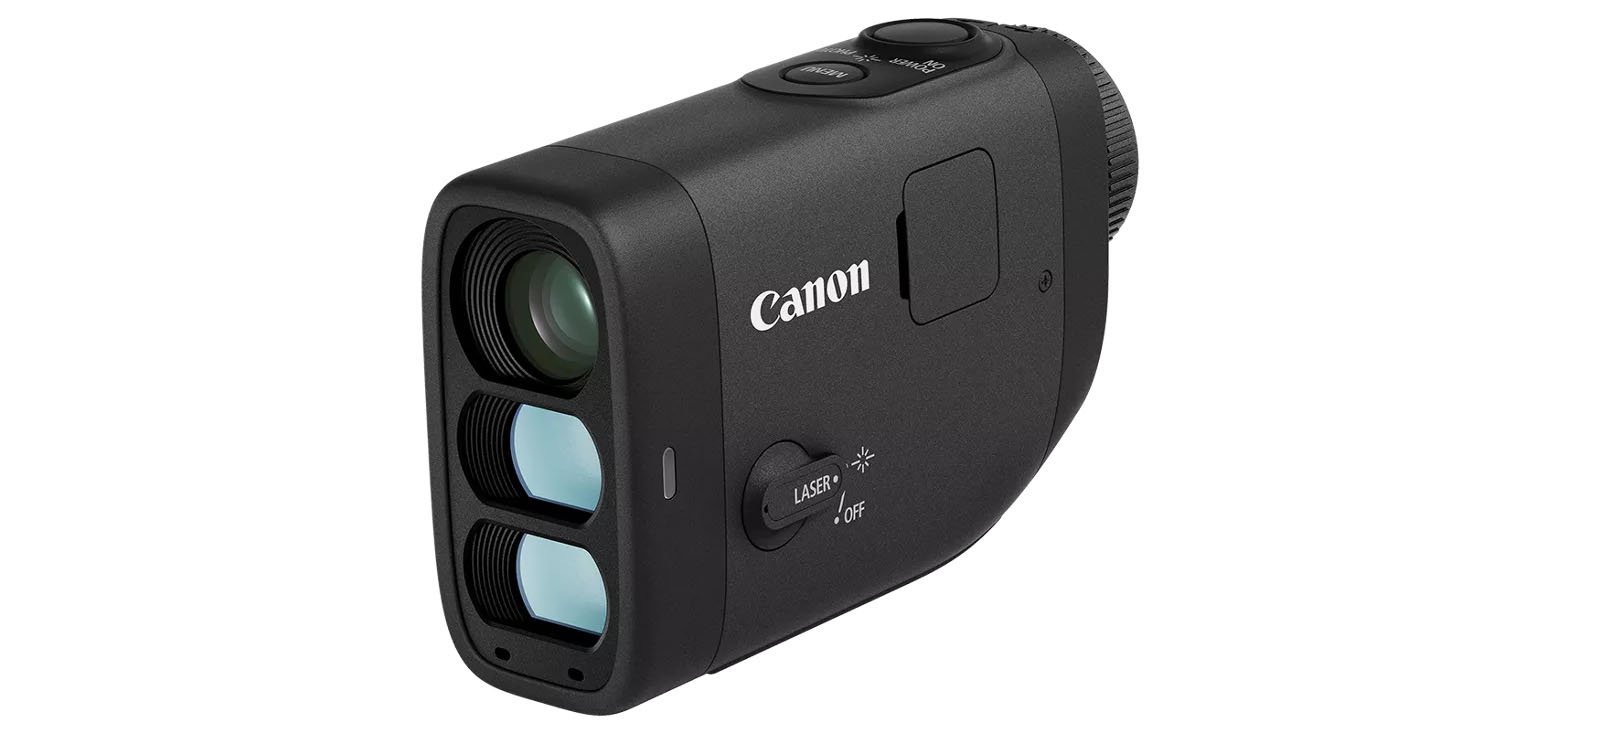 A black Canon laser rangefinder with a compact, rectangular design. It features multiple lenses on the front and control buttons on the top and side. The Canon logo is visible on the side. The device is designed for measuring distances accurately.